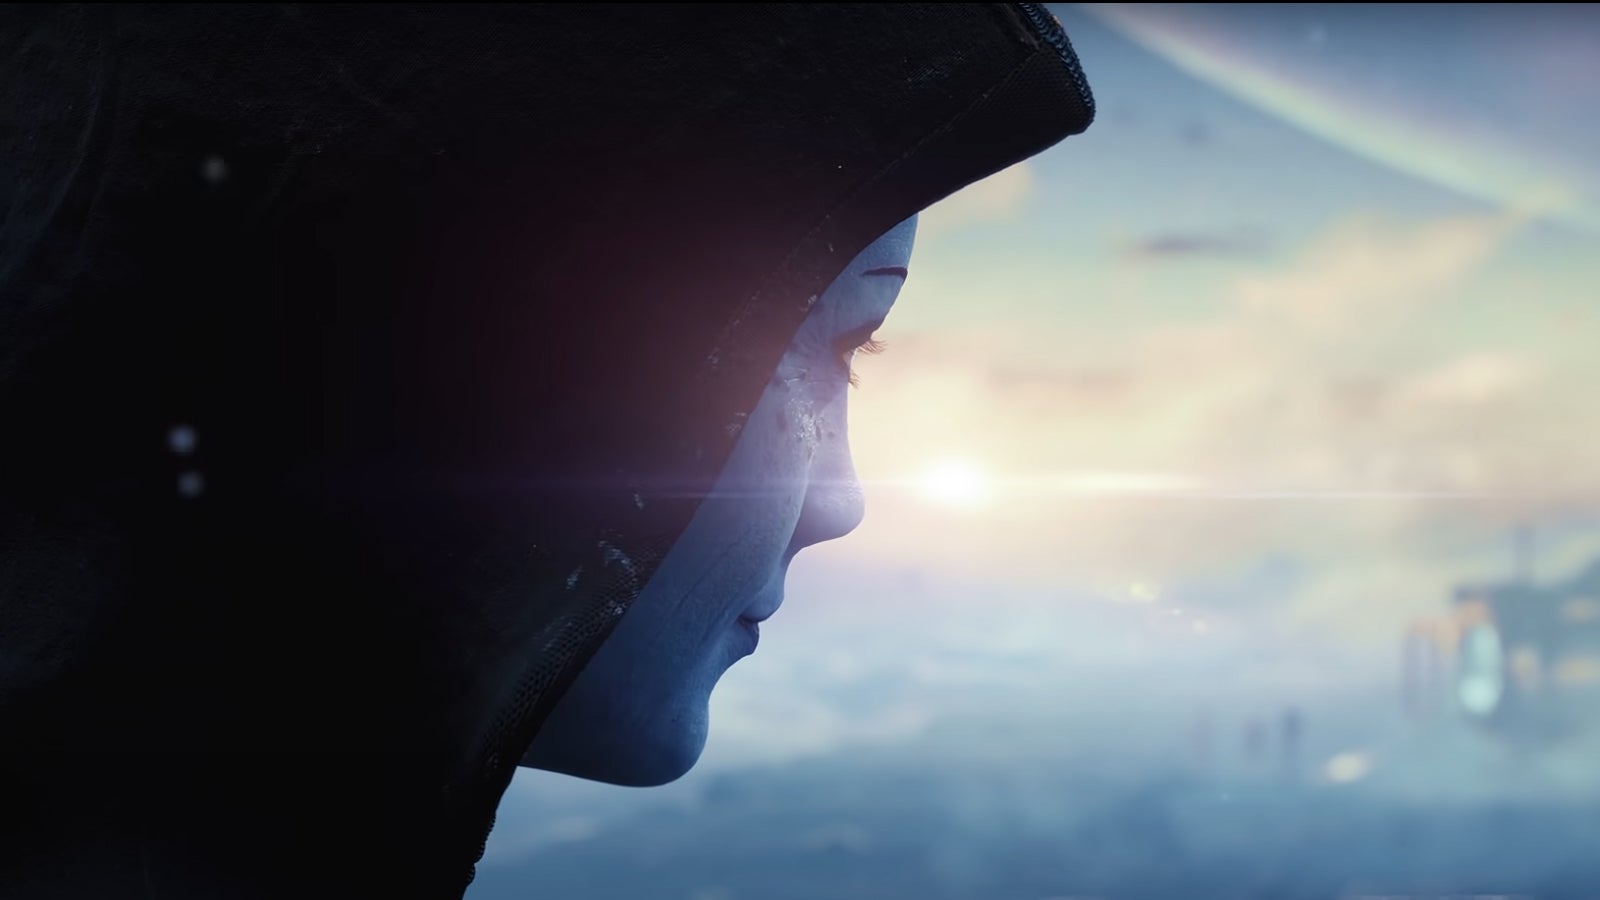 Image for No, BioWare hasn't teased a return for Shepard in the next Mass Effect